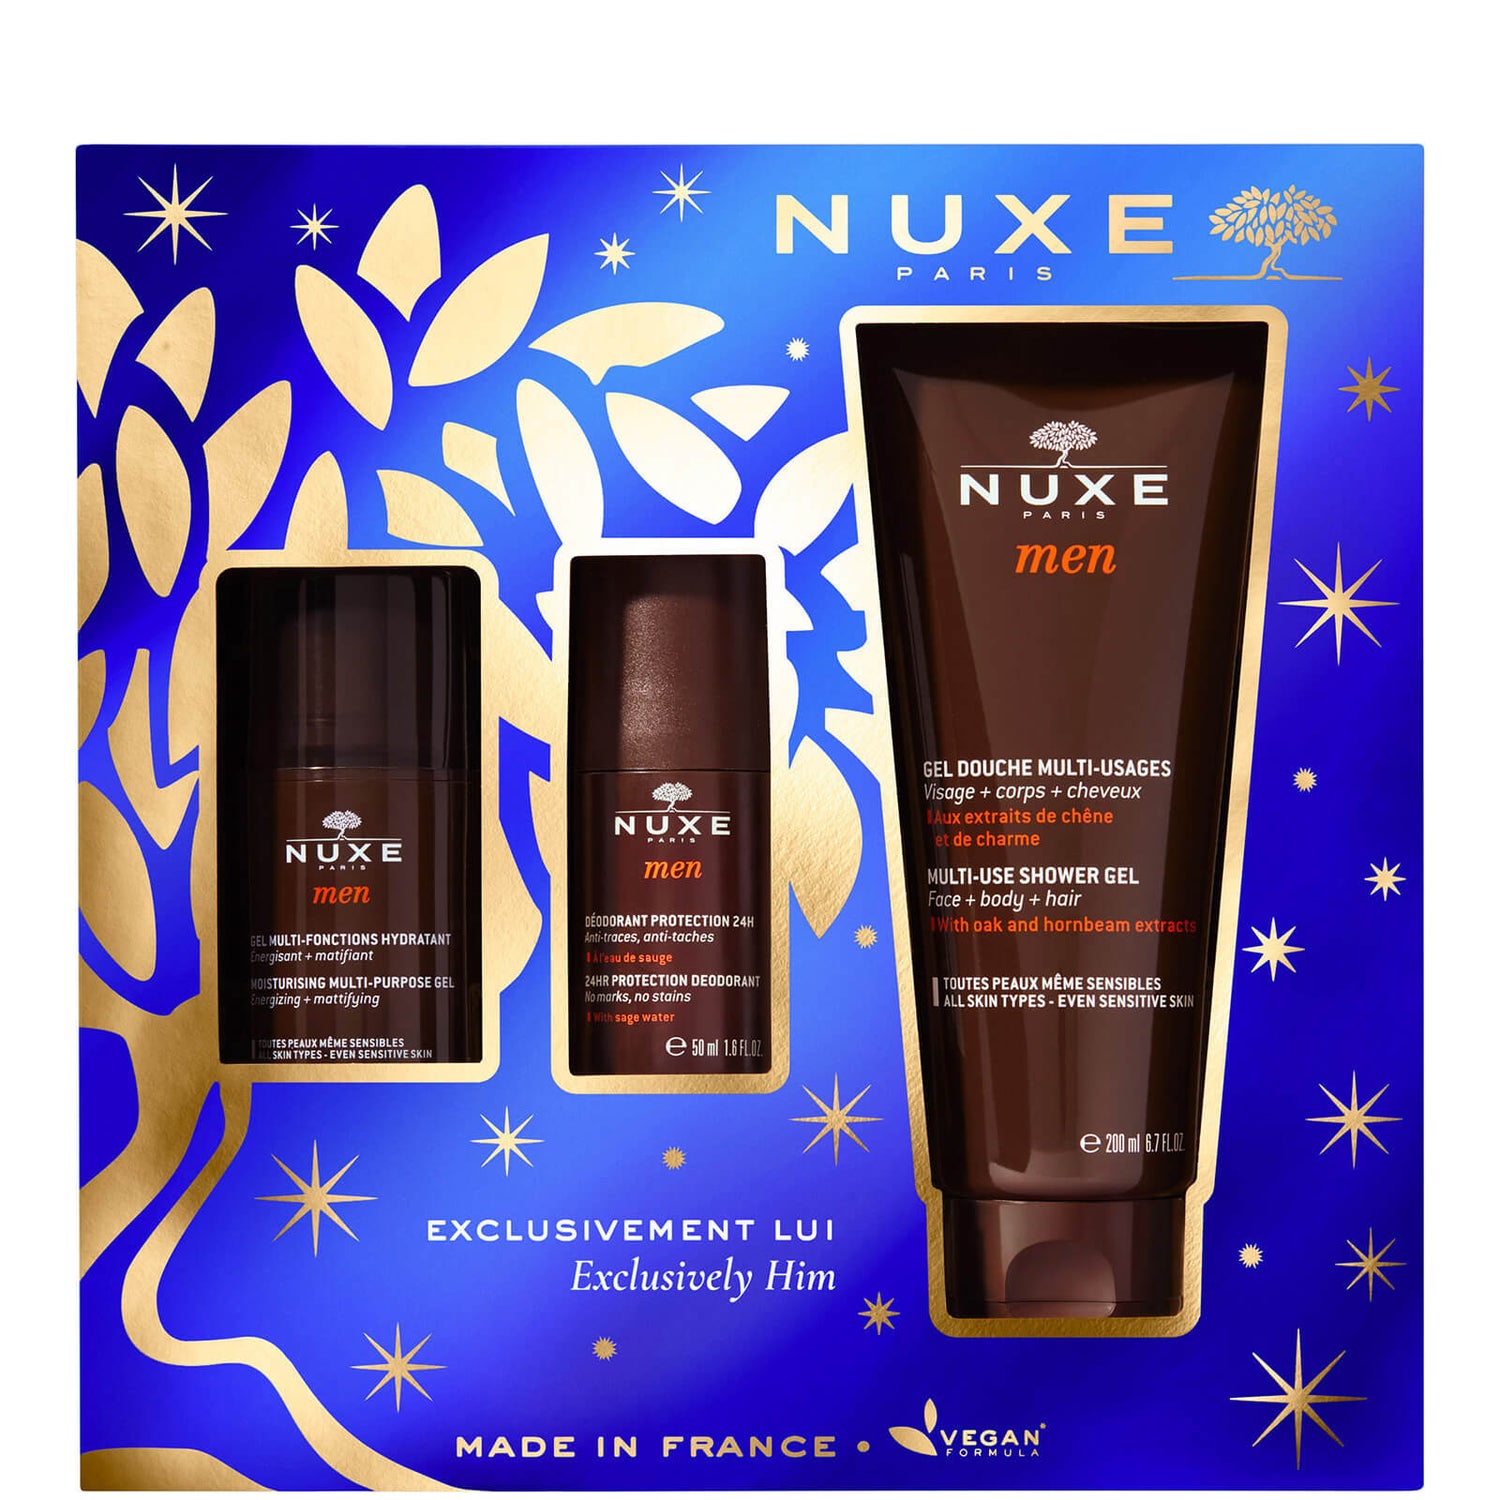 Nuxe Men A Gift Set Just For Him